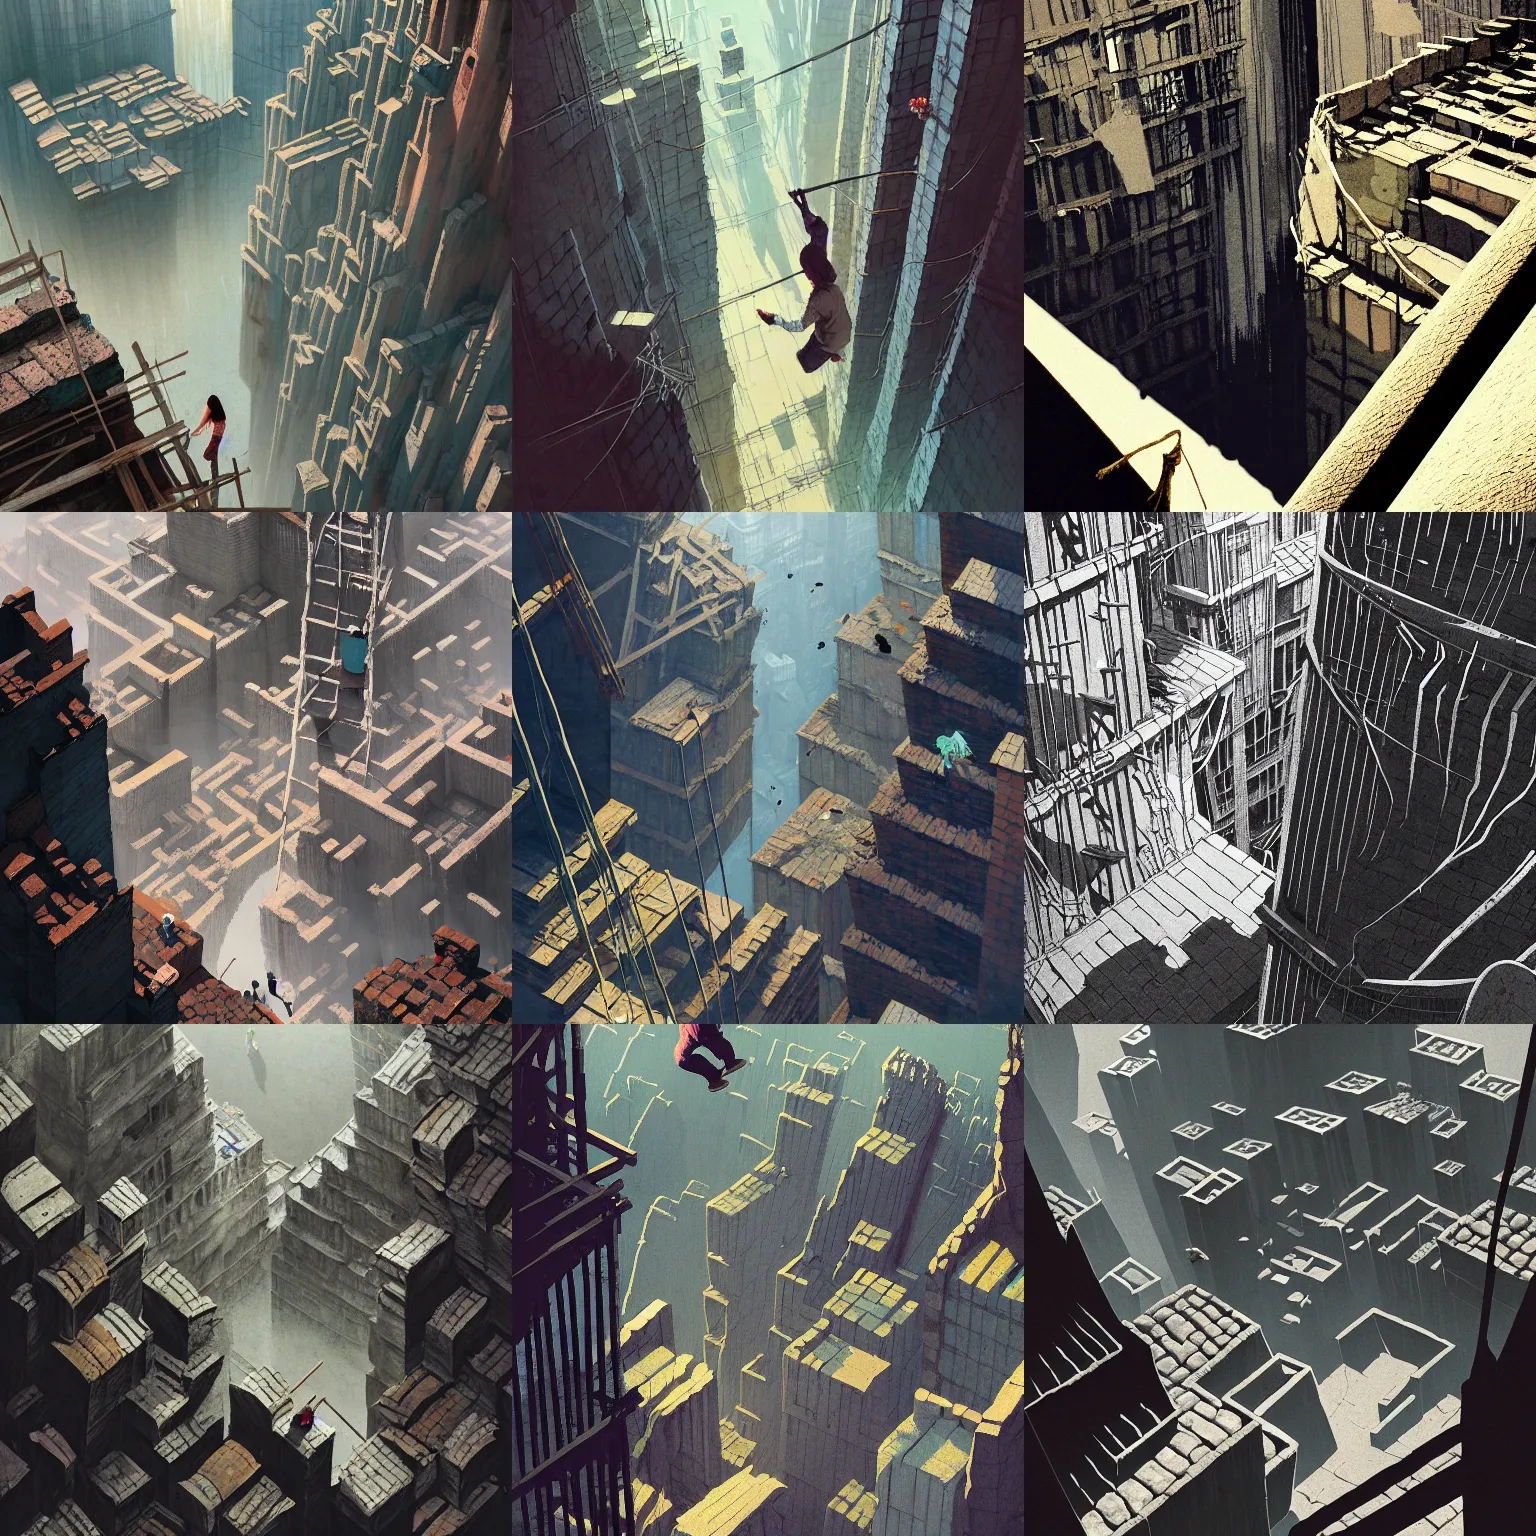 Prompt: a looking down from above, vertigo, bottomless void, jack and the bean stalk, tall cylindrical towers of ancient crumbling masonry, scaffolding, cracks, rubble, makeshift houses, cloth banners, long swing bridges, rise above clouds, illustration by ruan jia, cold color palate, bloom, dramatic lighting